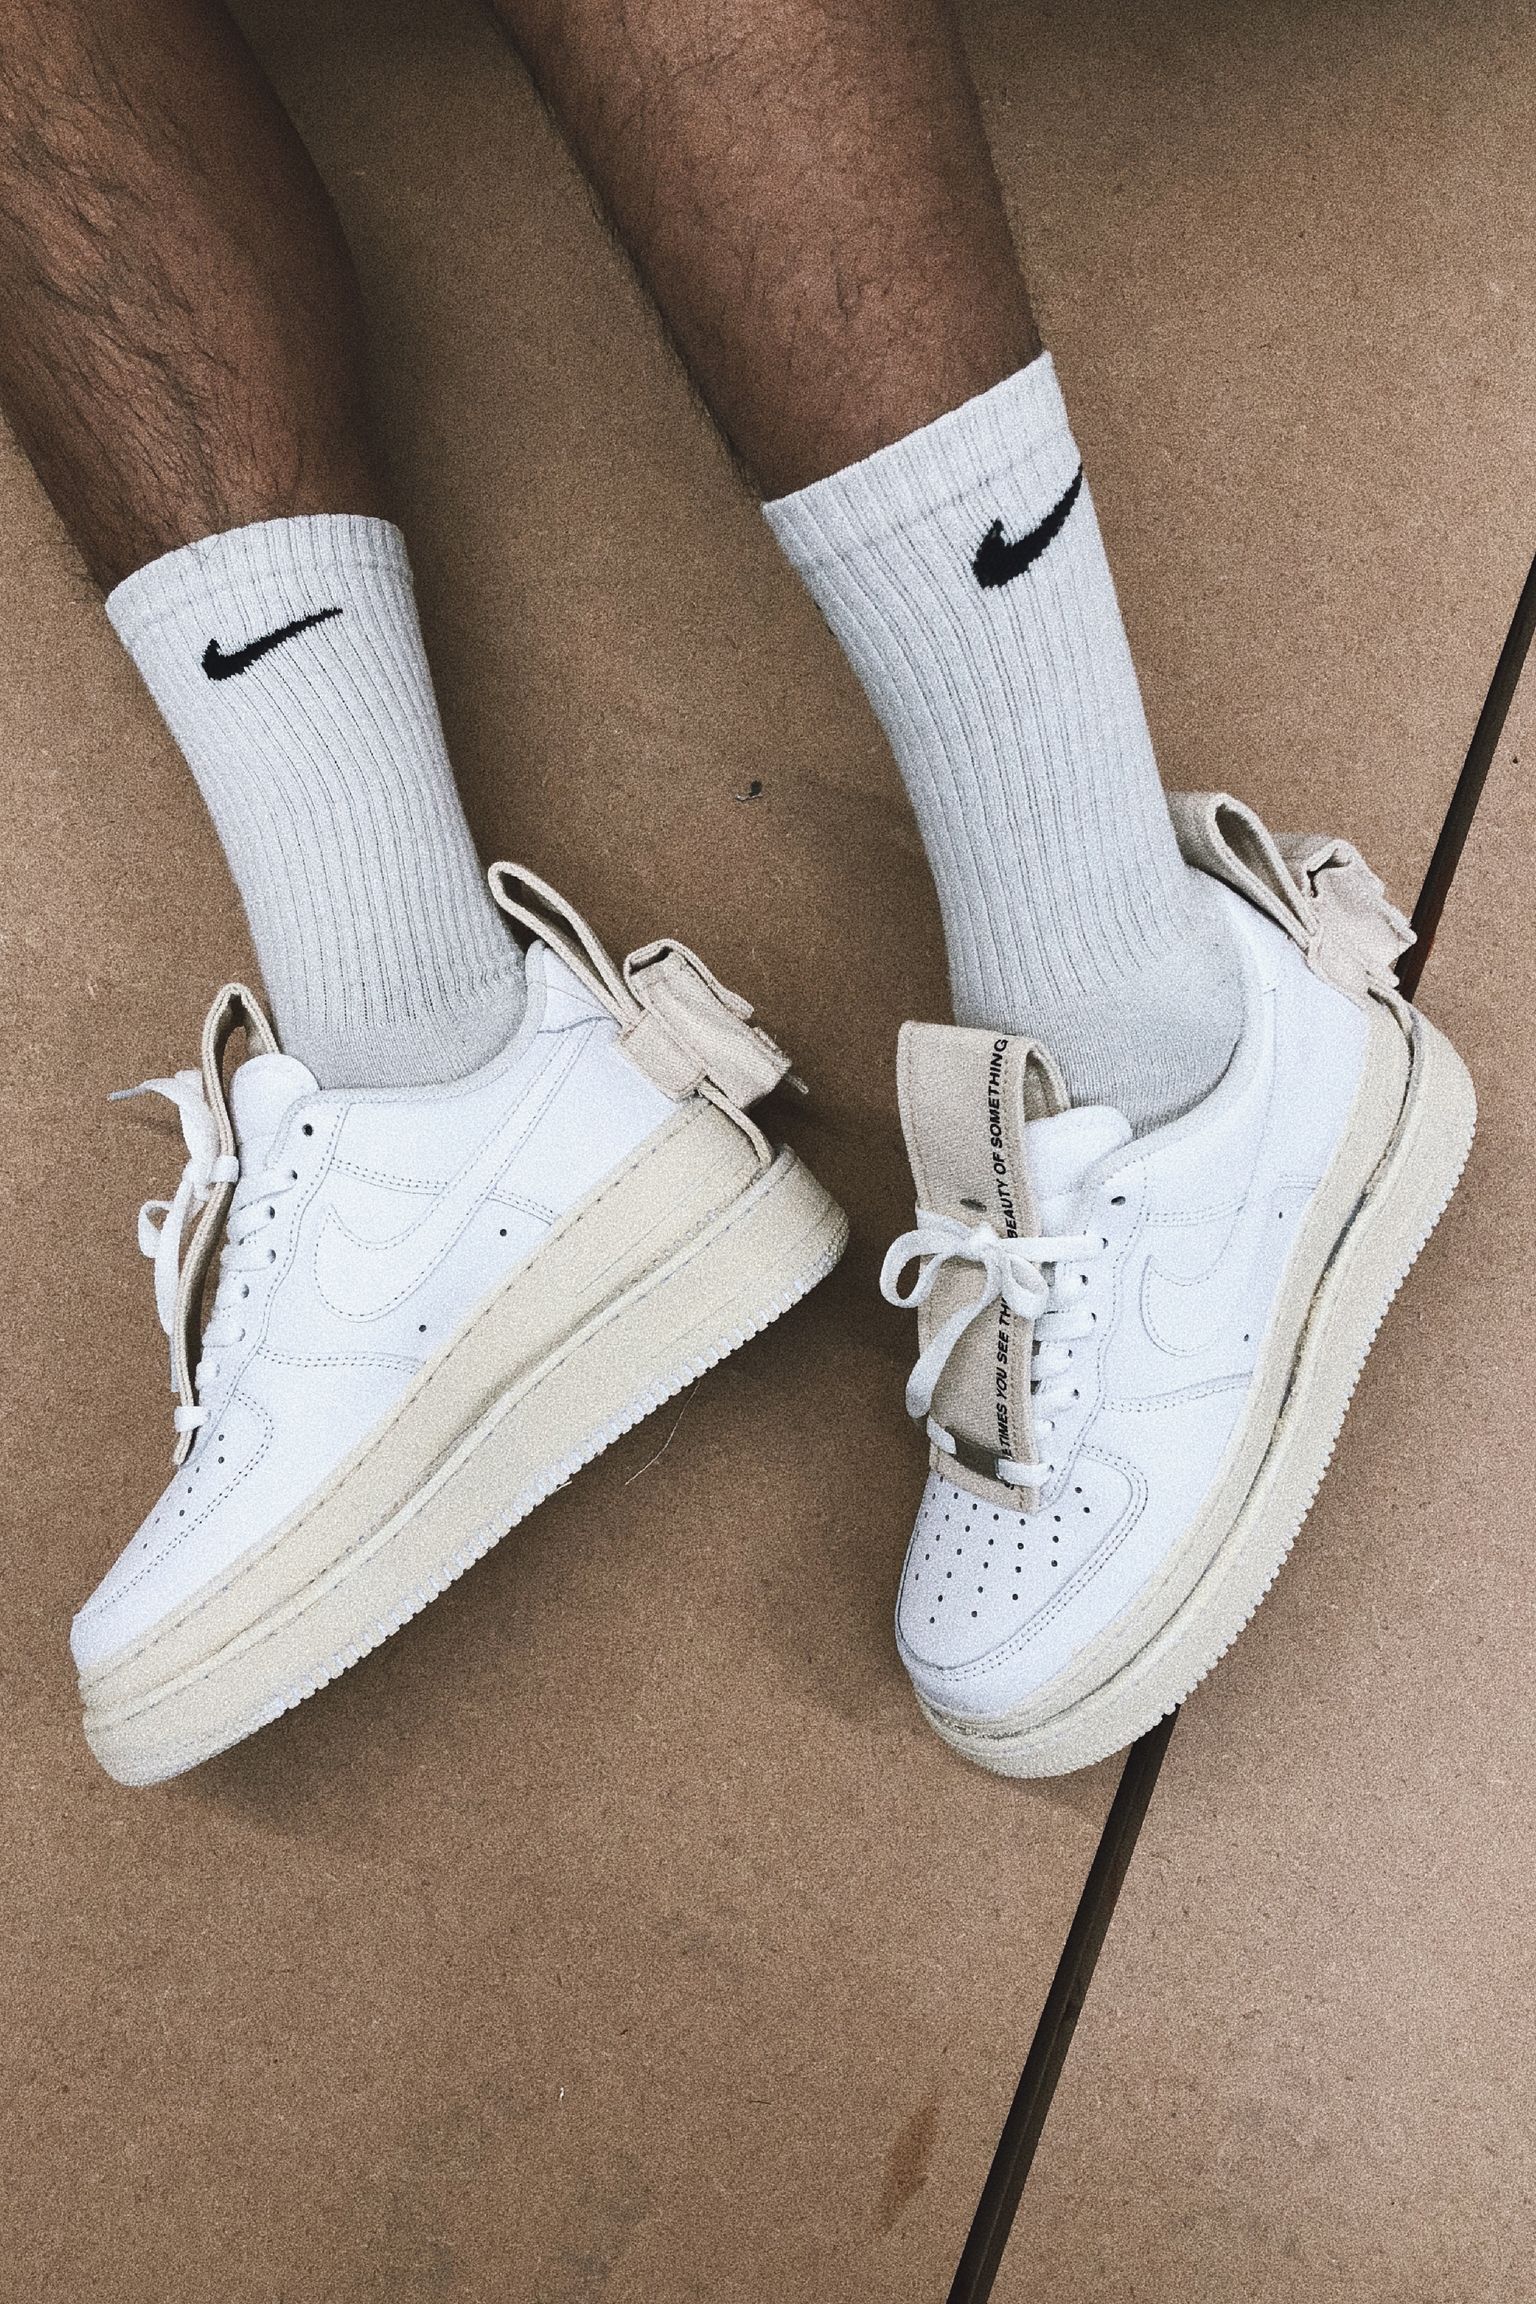 val kristopher nike air force 1